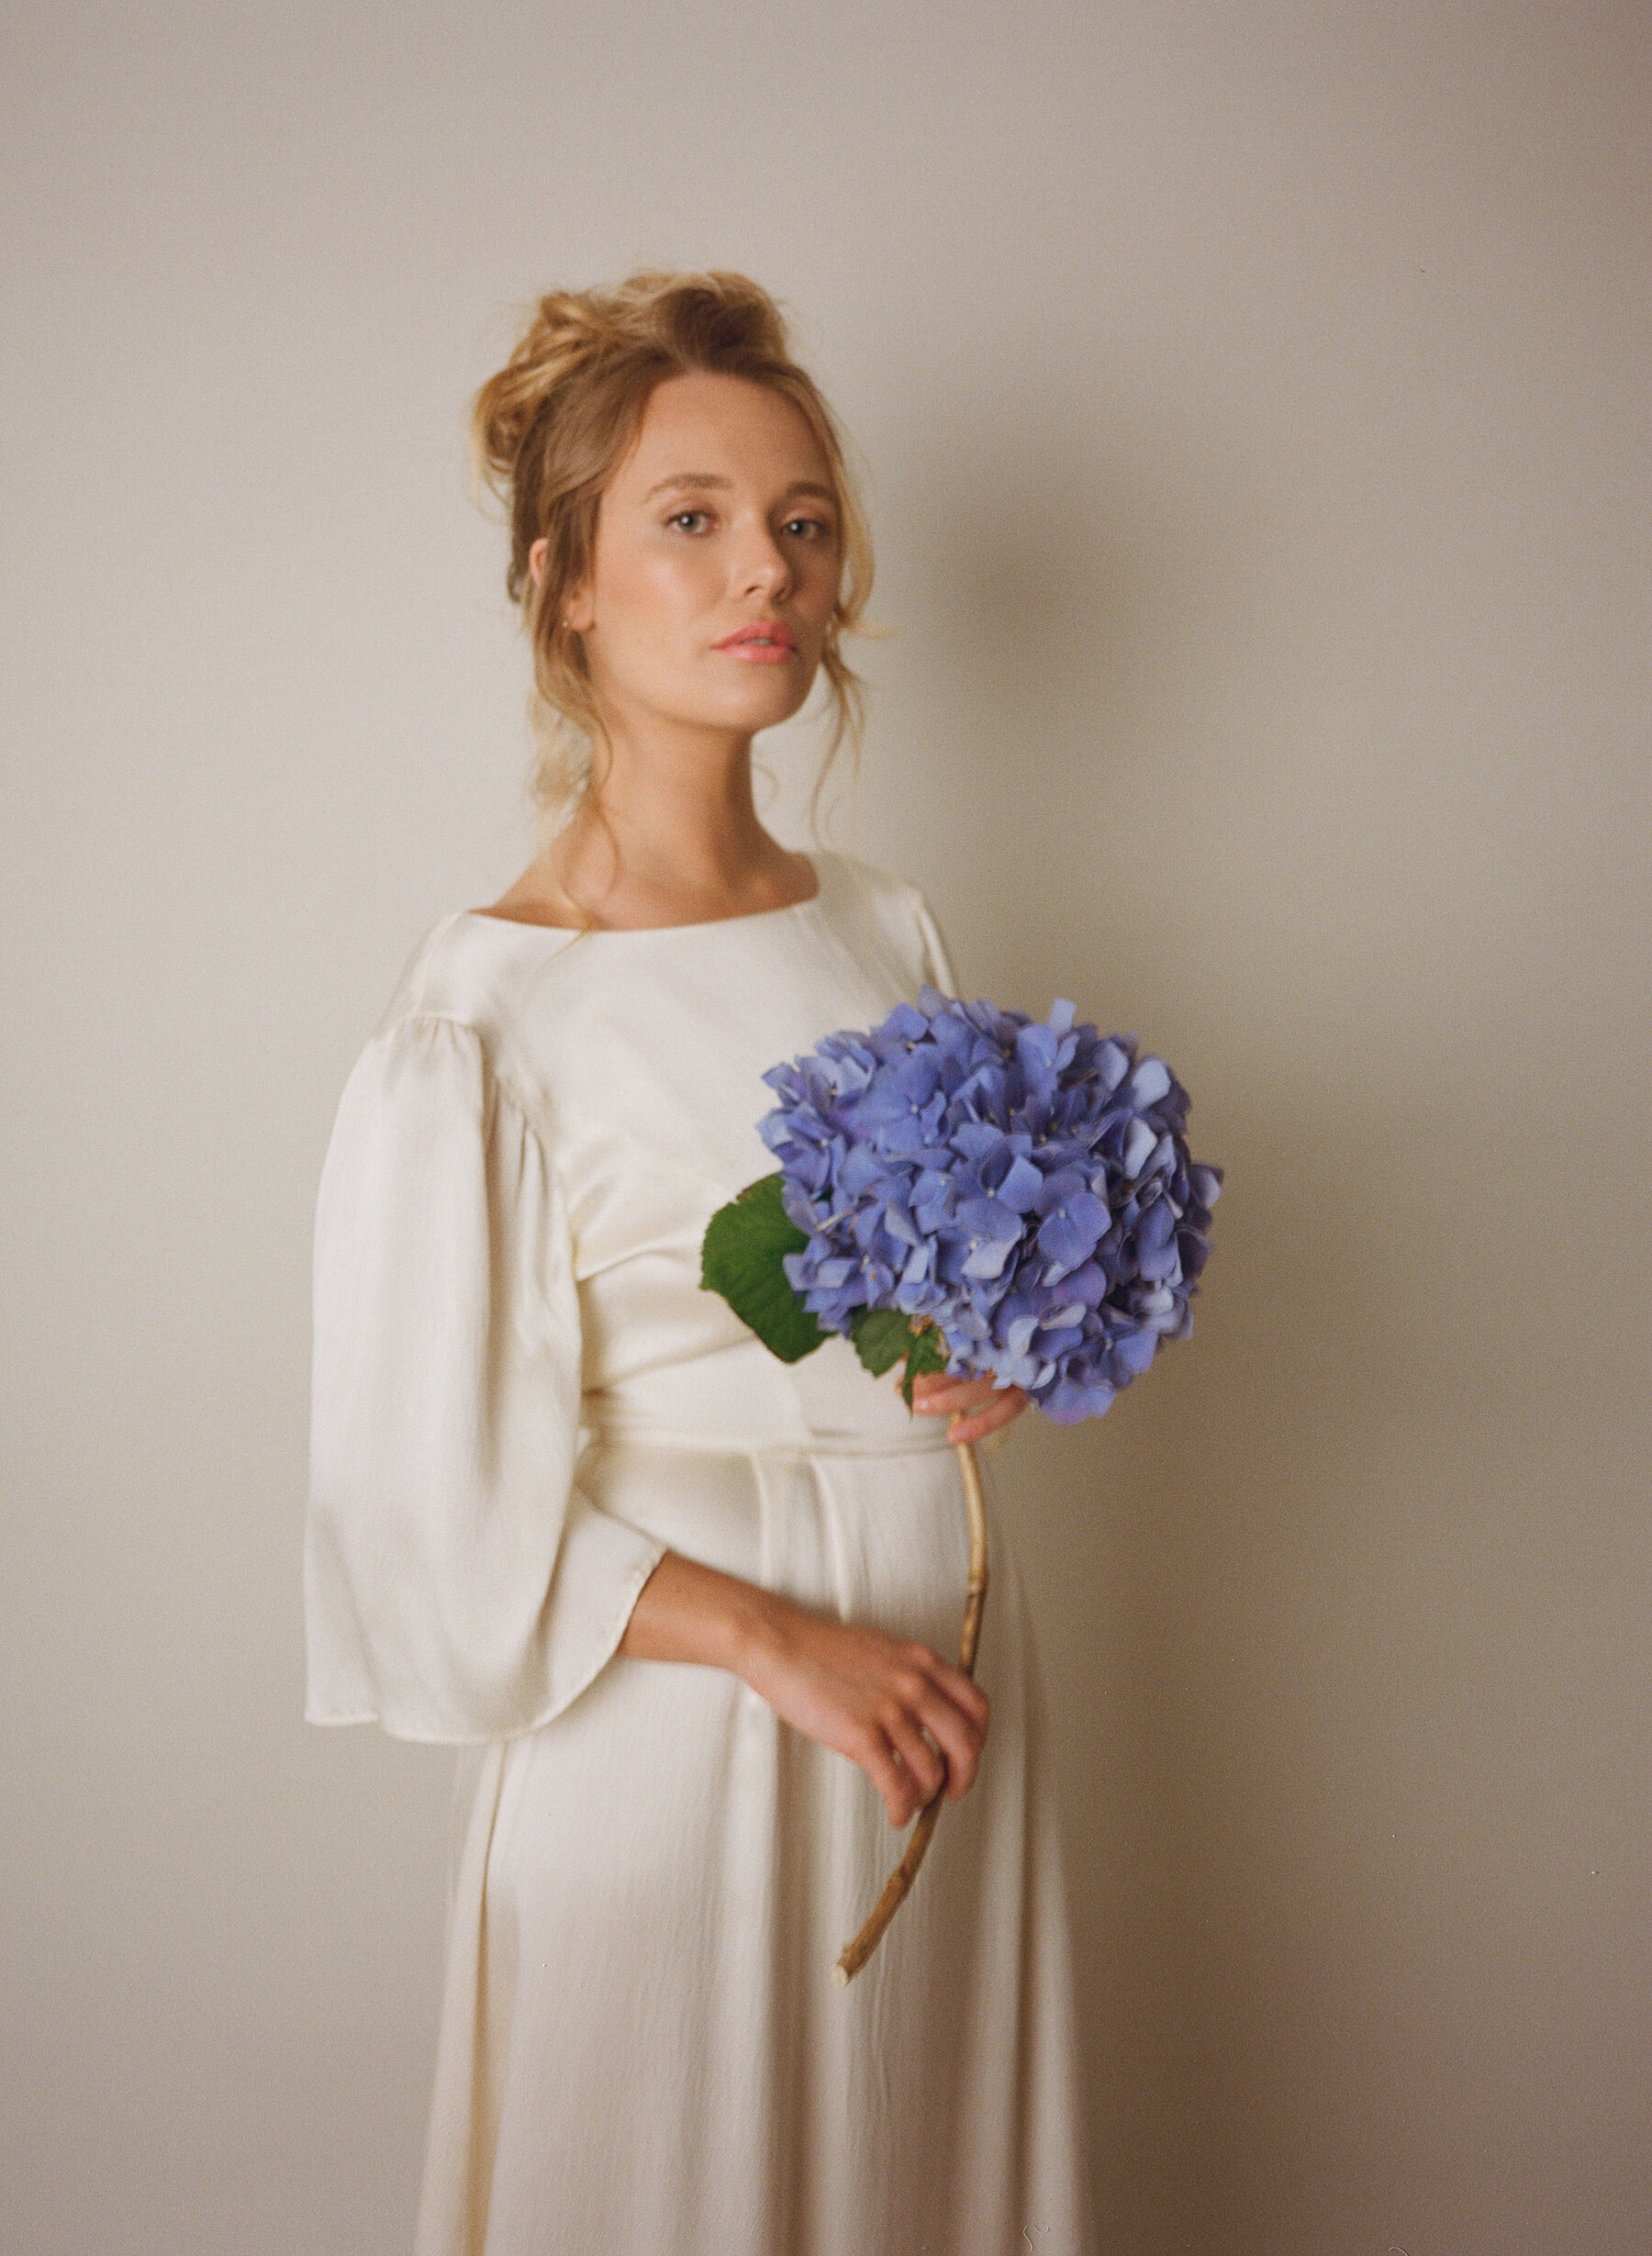 Analogue photograph of an ethical wedding dress by British designer, Kate Beaumont